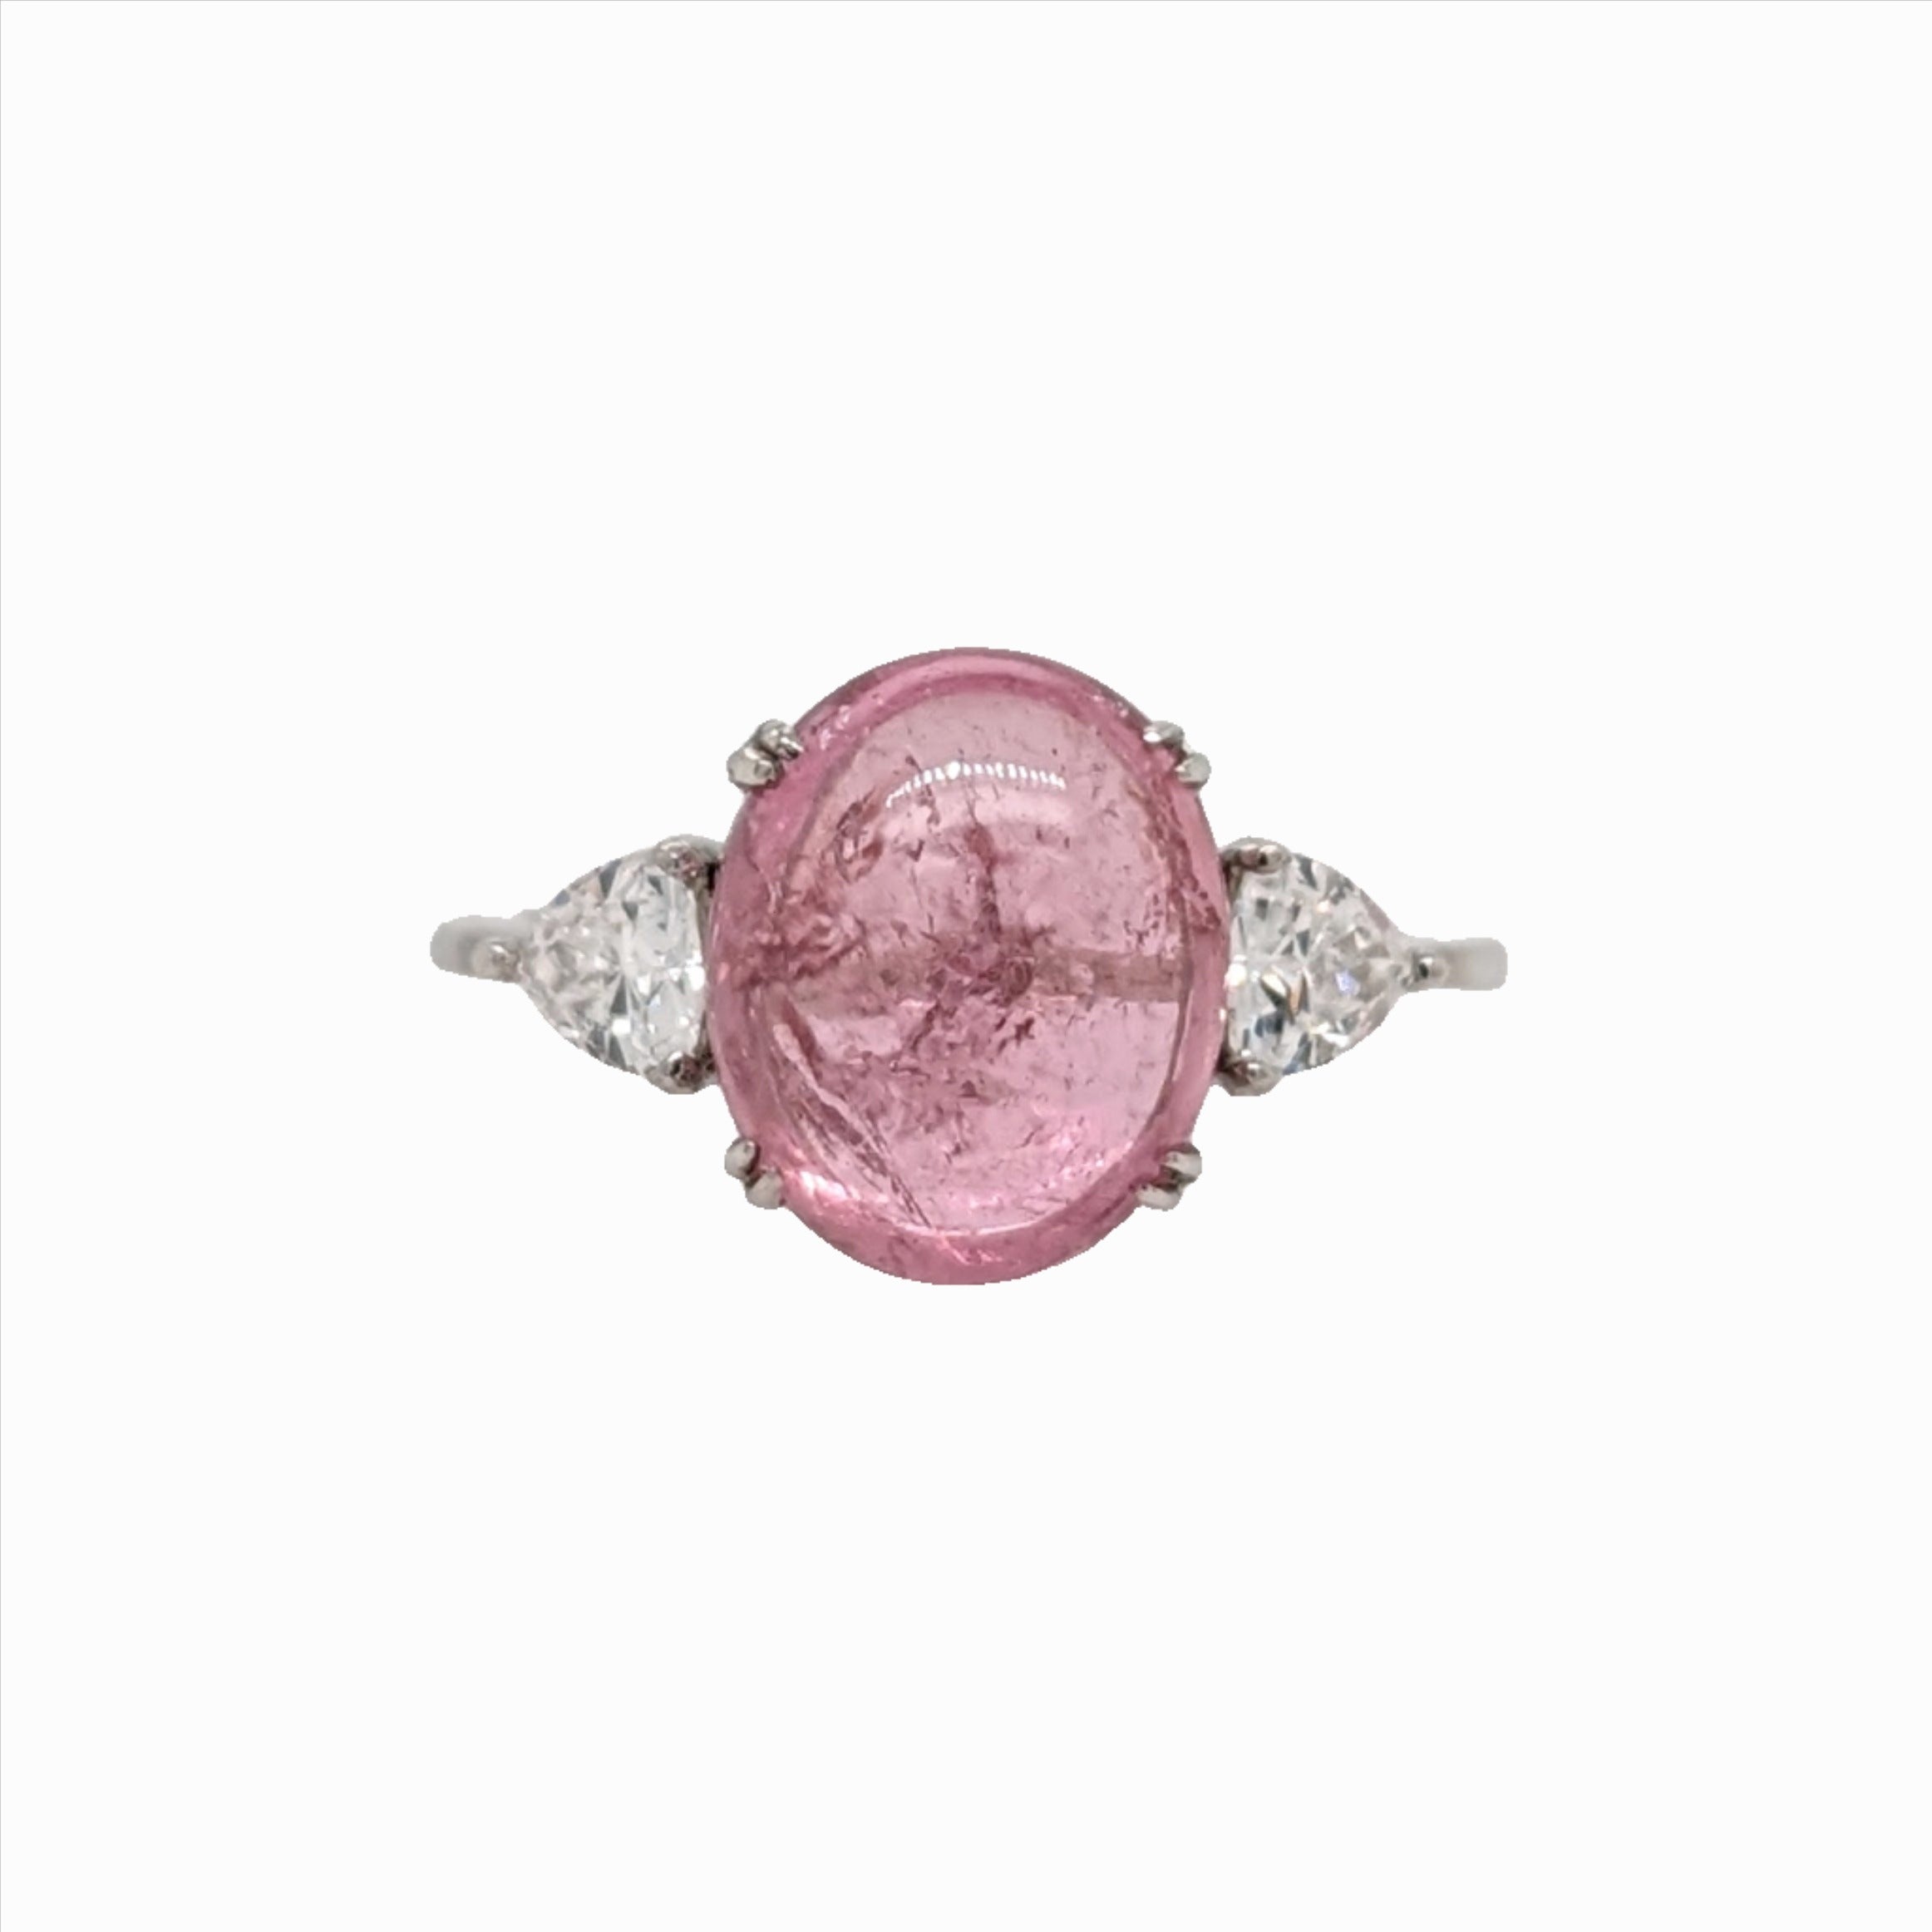 Statement Rings-Bubblegum Pink Tourmaline Ring w Lab Diamond Accents in Solid 14K White Gold | Oval 11x9mm | Pink Gemstone Ring | Statement | - NNJGemstones